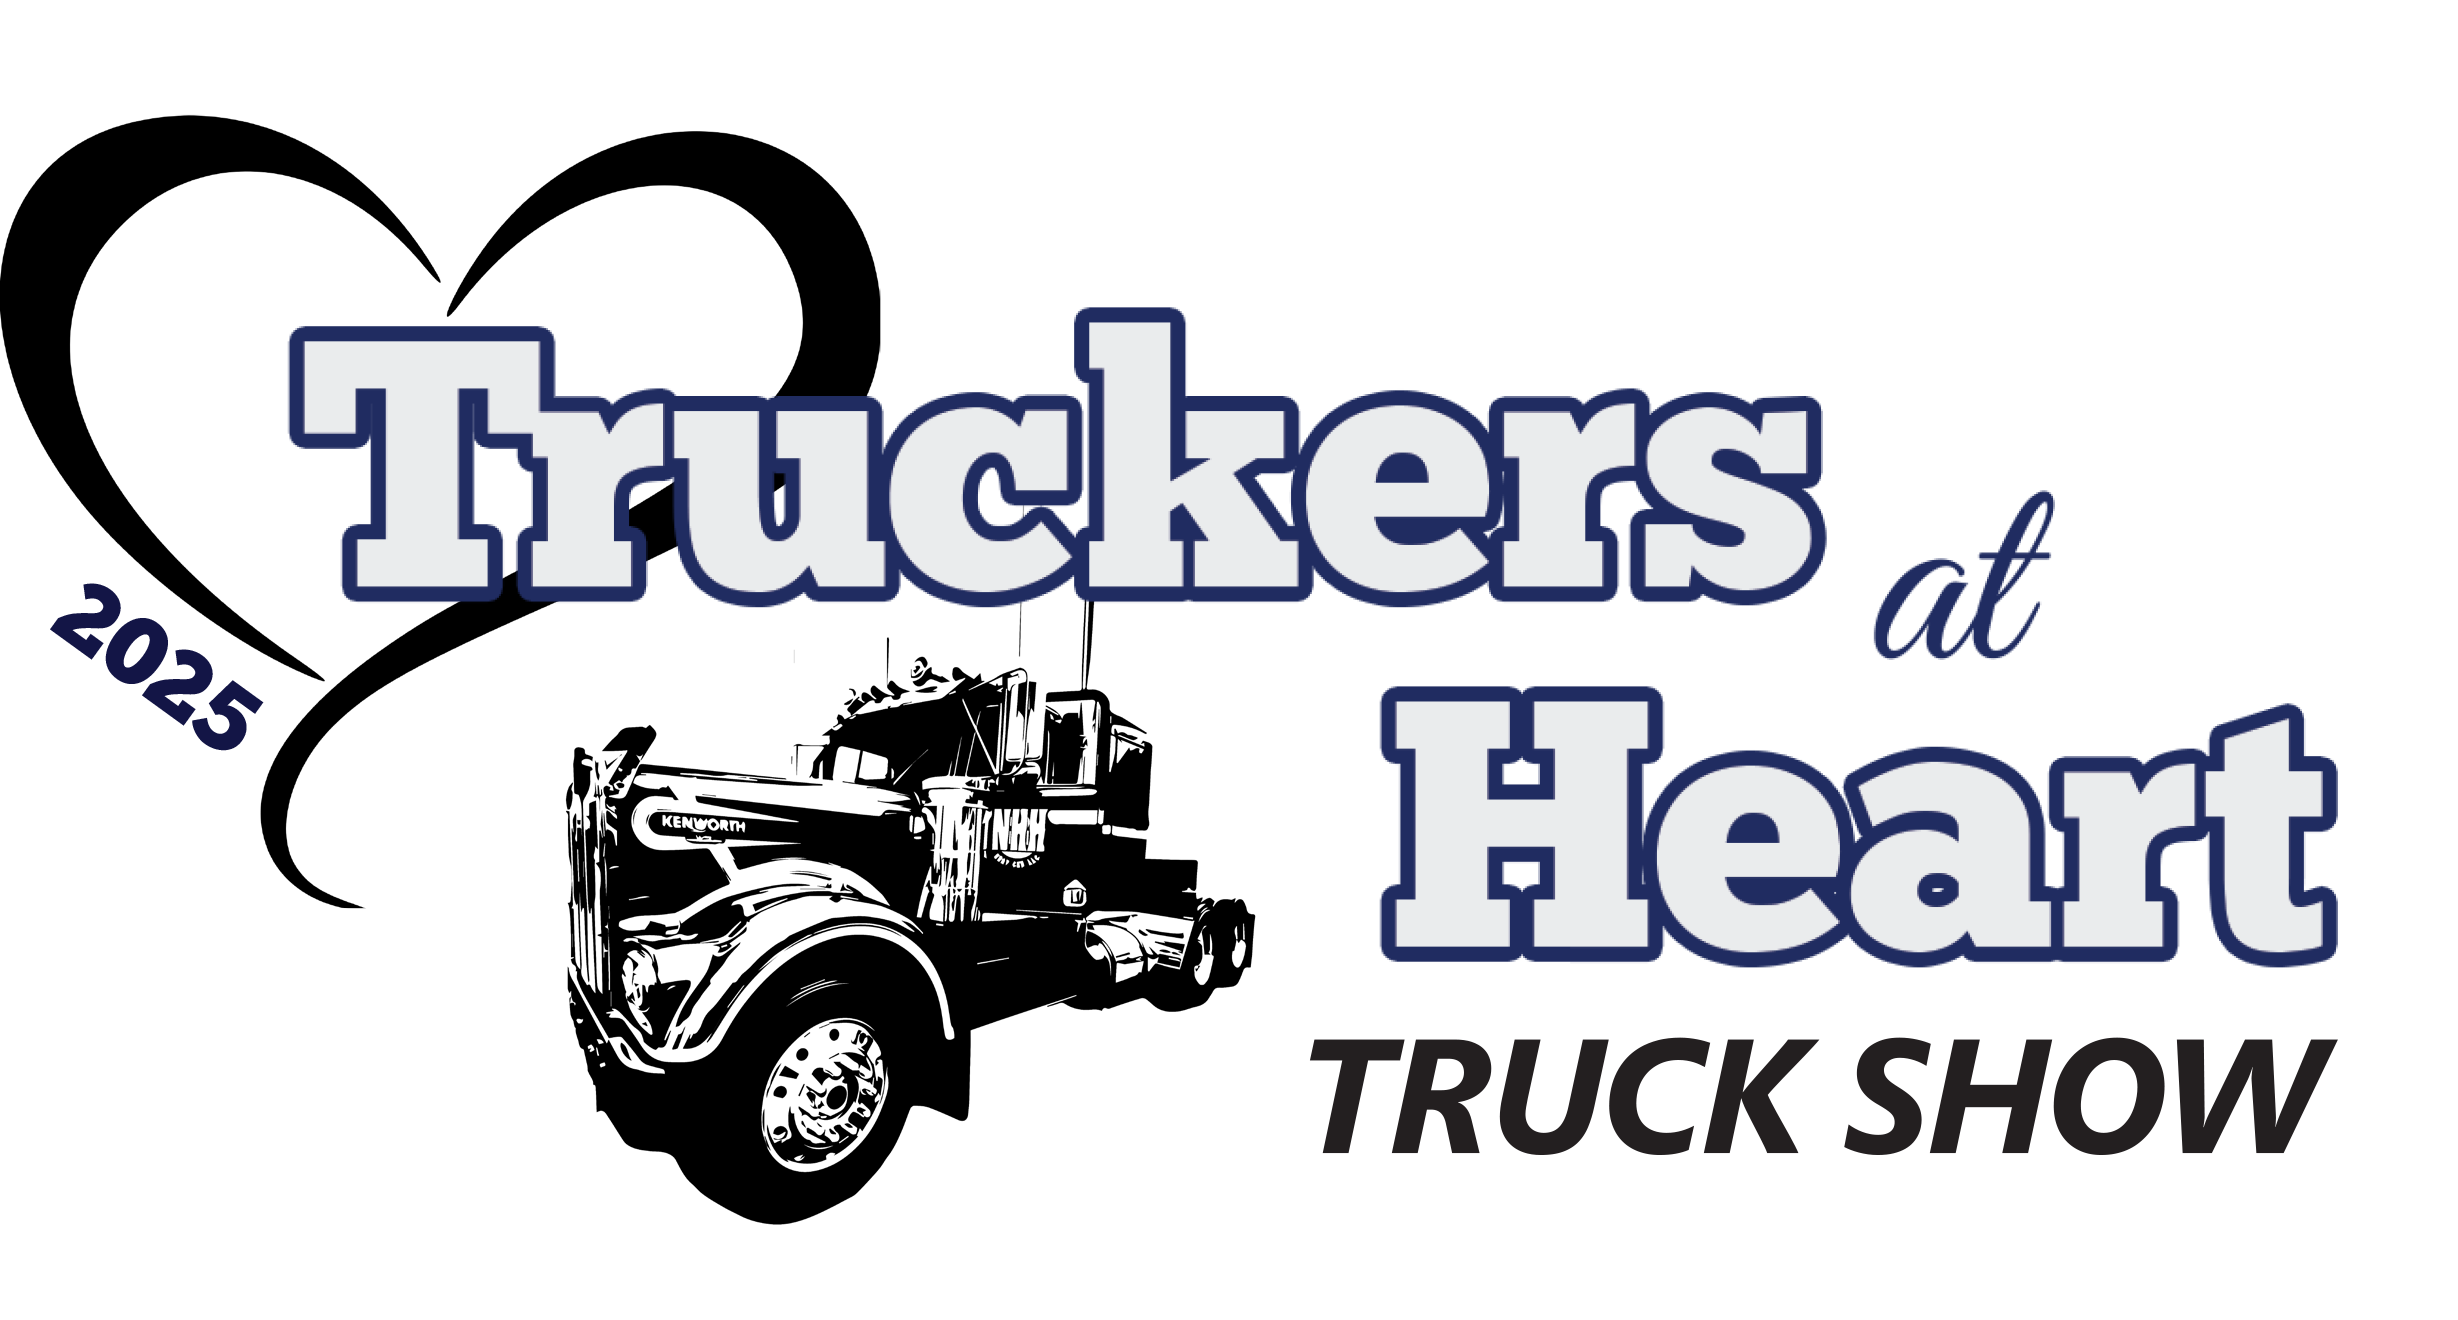 Truckers at Heart Truck Show